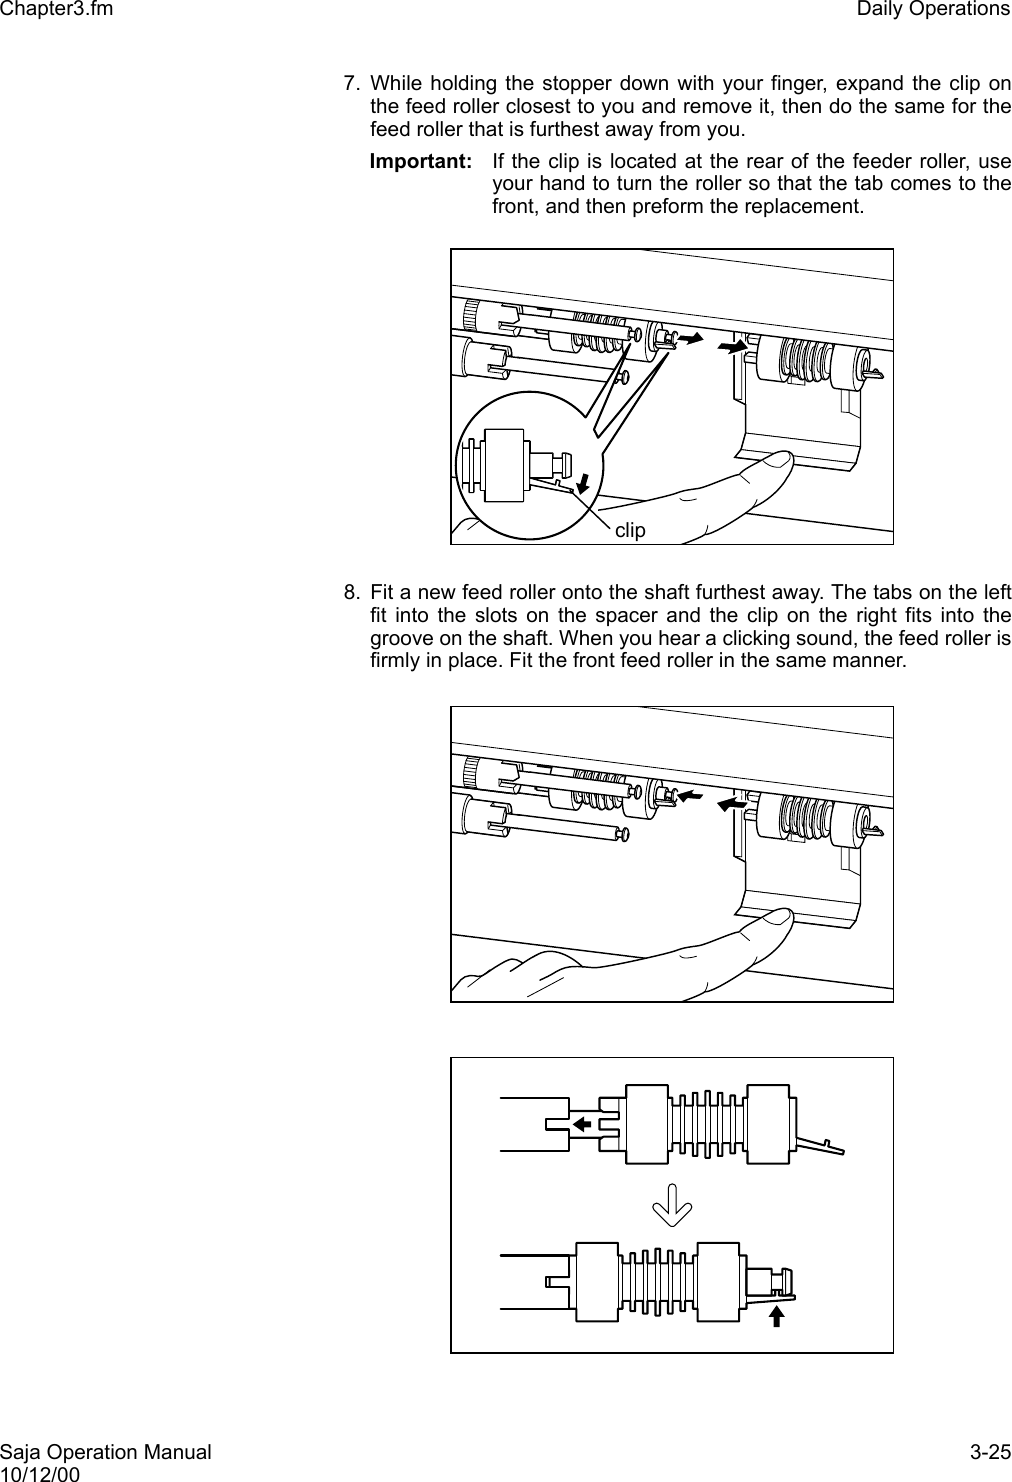 Saja Operation Manual 3-2510/12/00Chapter3.fm Daily Operations7. While holding the stopper down with your finger, expand the clip onthe feed roller closest to you and remove it, then do the same for thefeed roller that is furthest away from you.Important:  If the clip is located at the rear of the feeder roller, useyour hand to turn the roller so that the tab comes to thefront, and then preform the replacement.8. Fit a new feed roller onto the shaft furthest away. The tabs on the leftfit into the slots on the spacer and the clip on the right fits into thegroove on the shaft. When you hear a clicking sound, the feed roller isfirmly in place. Fit the front feed roller in the same manner.clip